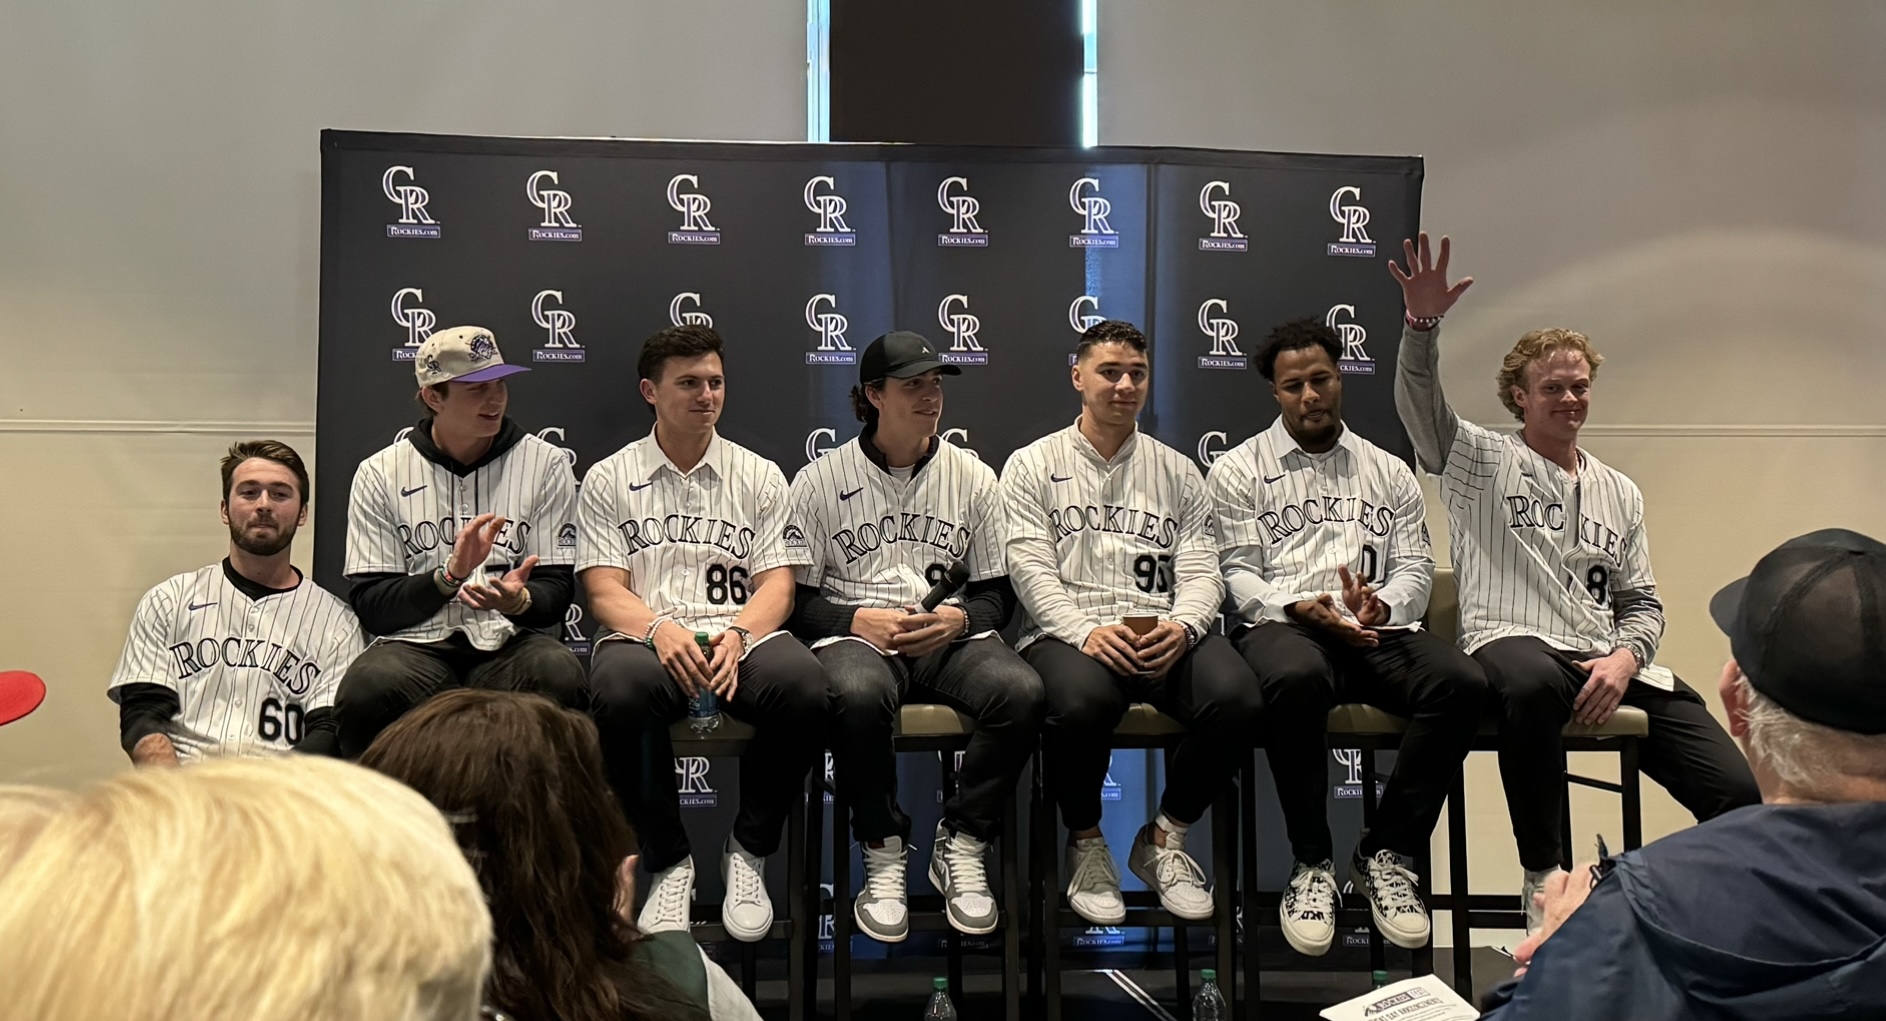 Sterlin Thompson, Zac Veen, Drew Romo, Chase Dollander, Gabriel Hughes, Jaden Hill, and Case Williams on the stage at RockiesFest. Each is wearing a purple-pinstripes Rockies jersey and sitting on a tall stool. They’re also wearing some very nice trainers.